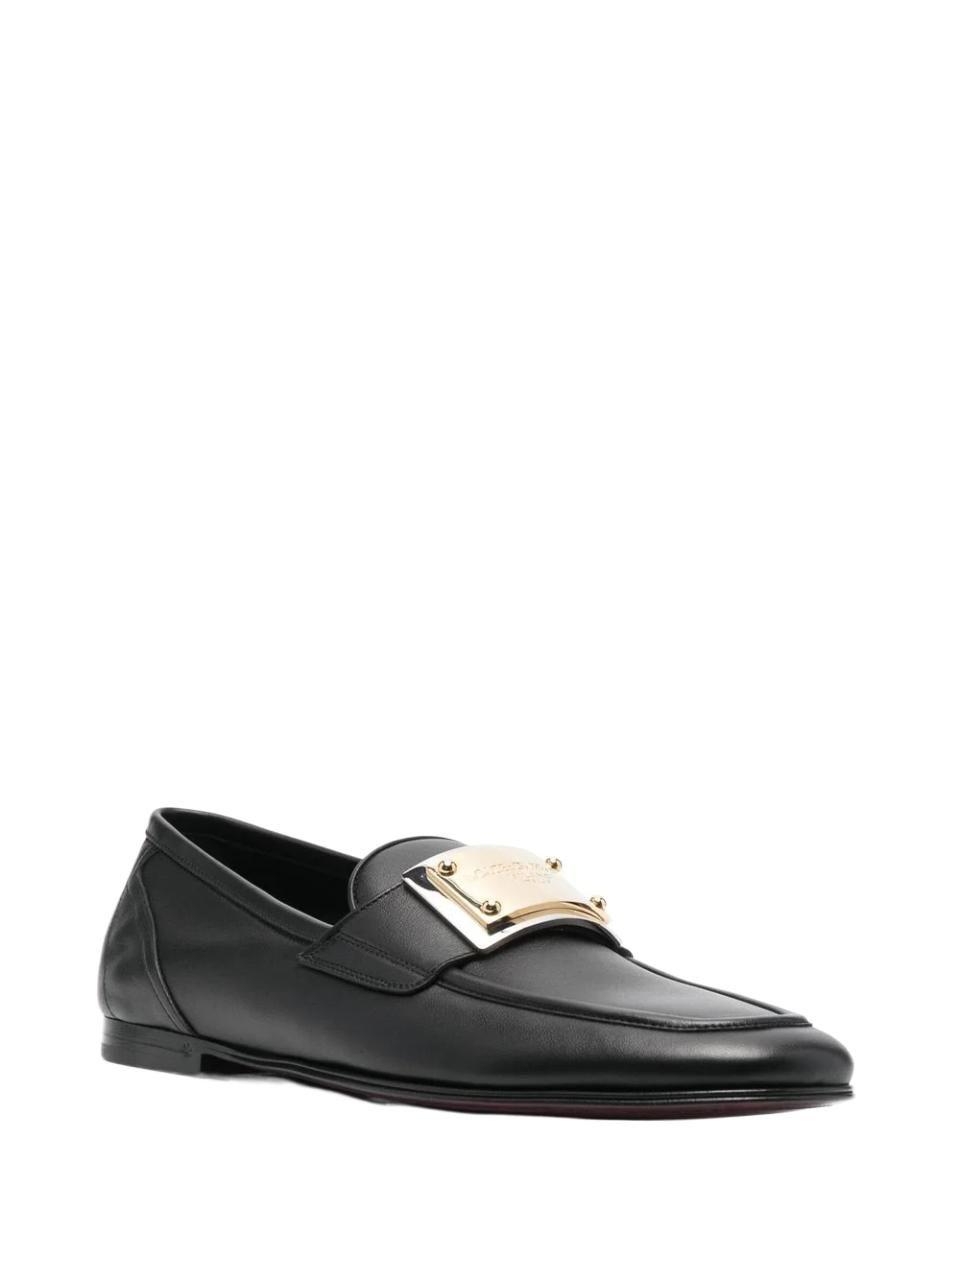 Mens Shoes Slip-on shoes Monk shoes Dolce & Gabbana Leather Brushed Calfskin Monk Strap Shoes in Black for Men 